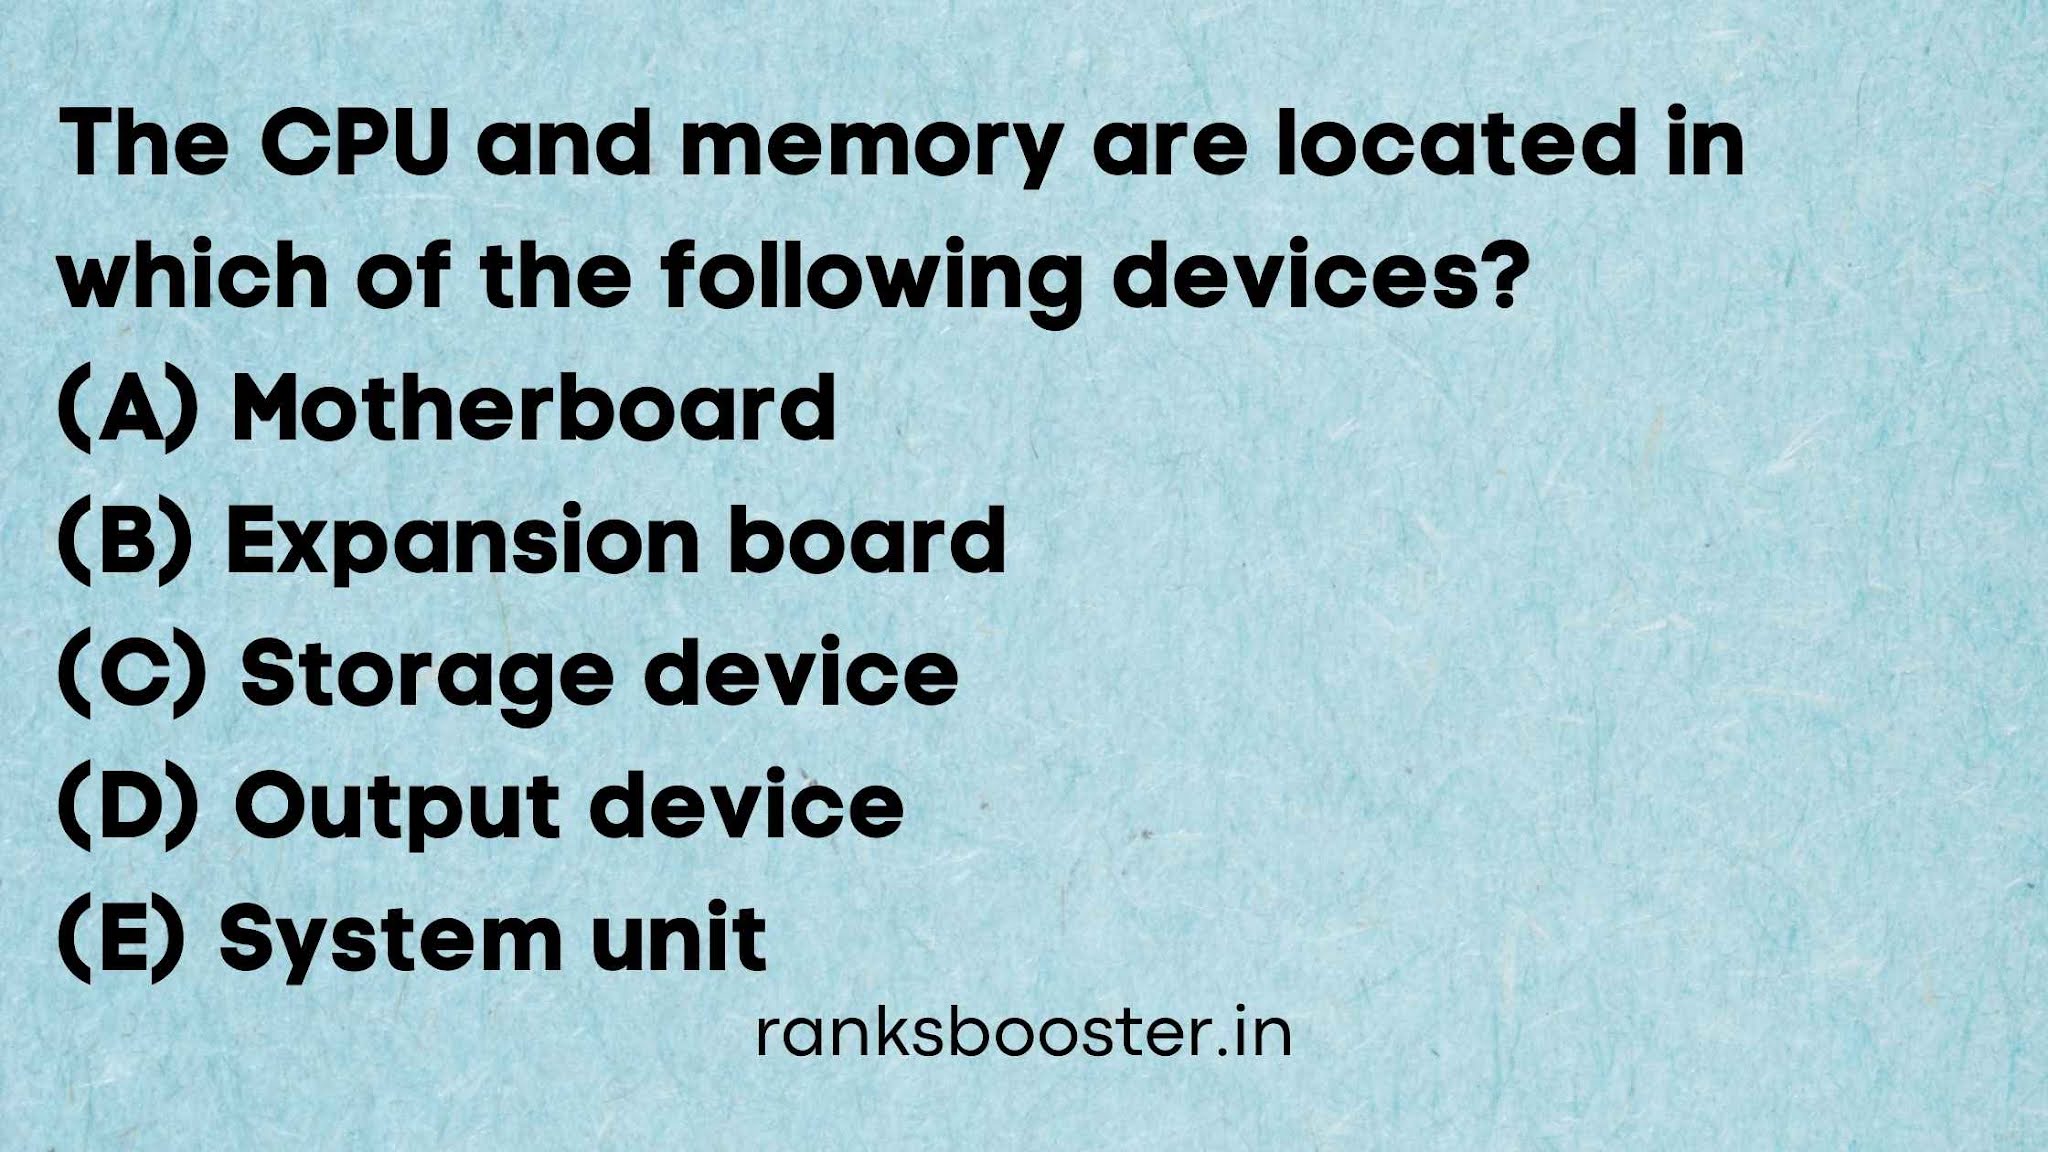 The CPU and memory are located in which of the following devices? (A) Motherboard (B) Expansion board (C) Storage device (D) Output device (E) System unit